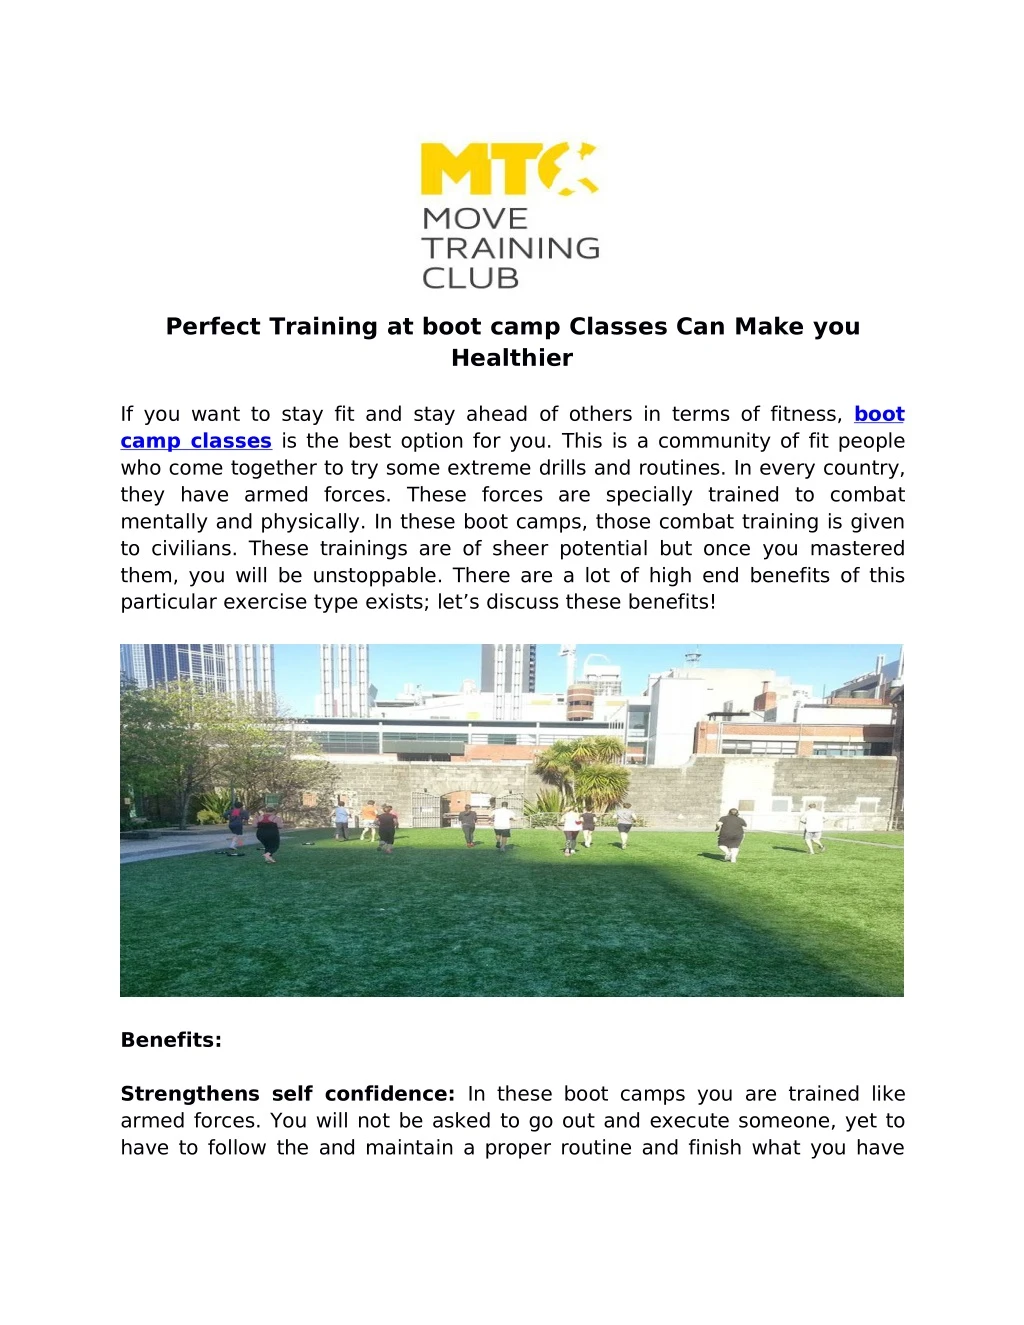 perfect training at boot camp classes can make